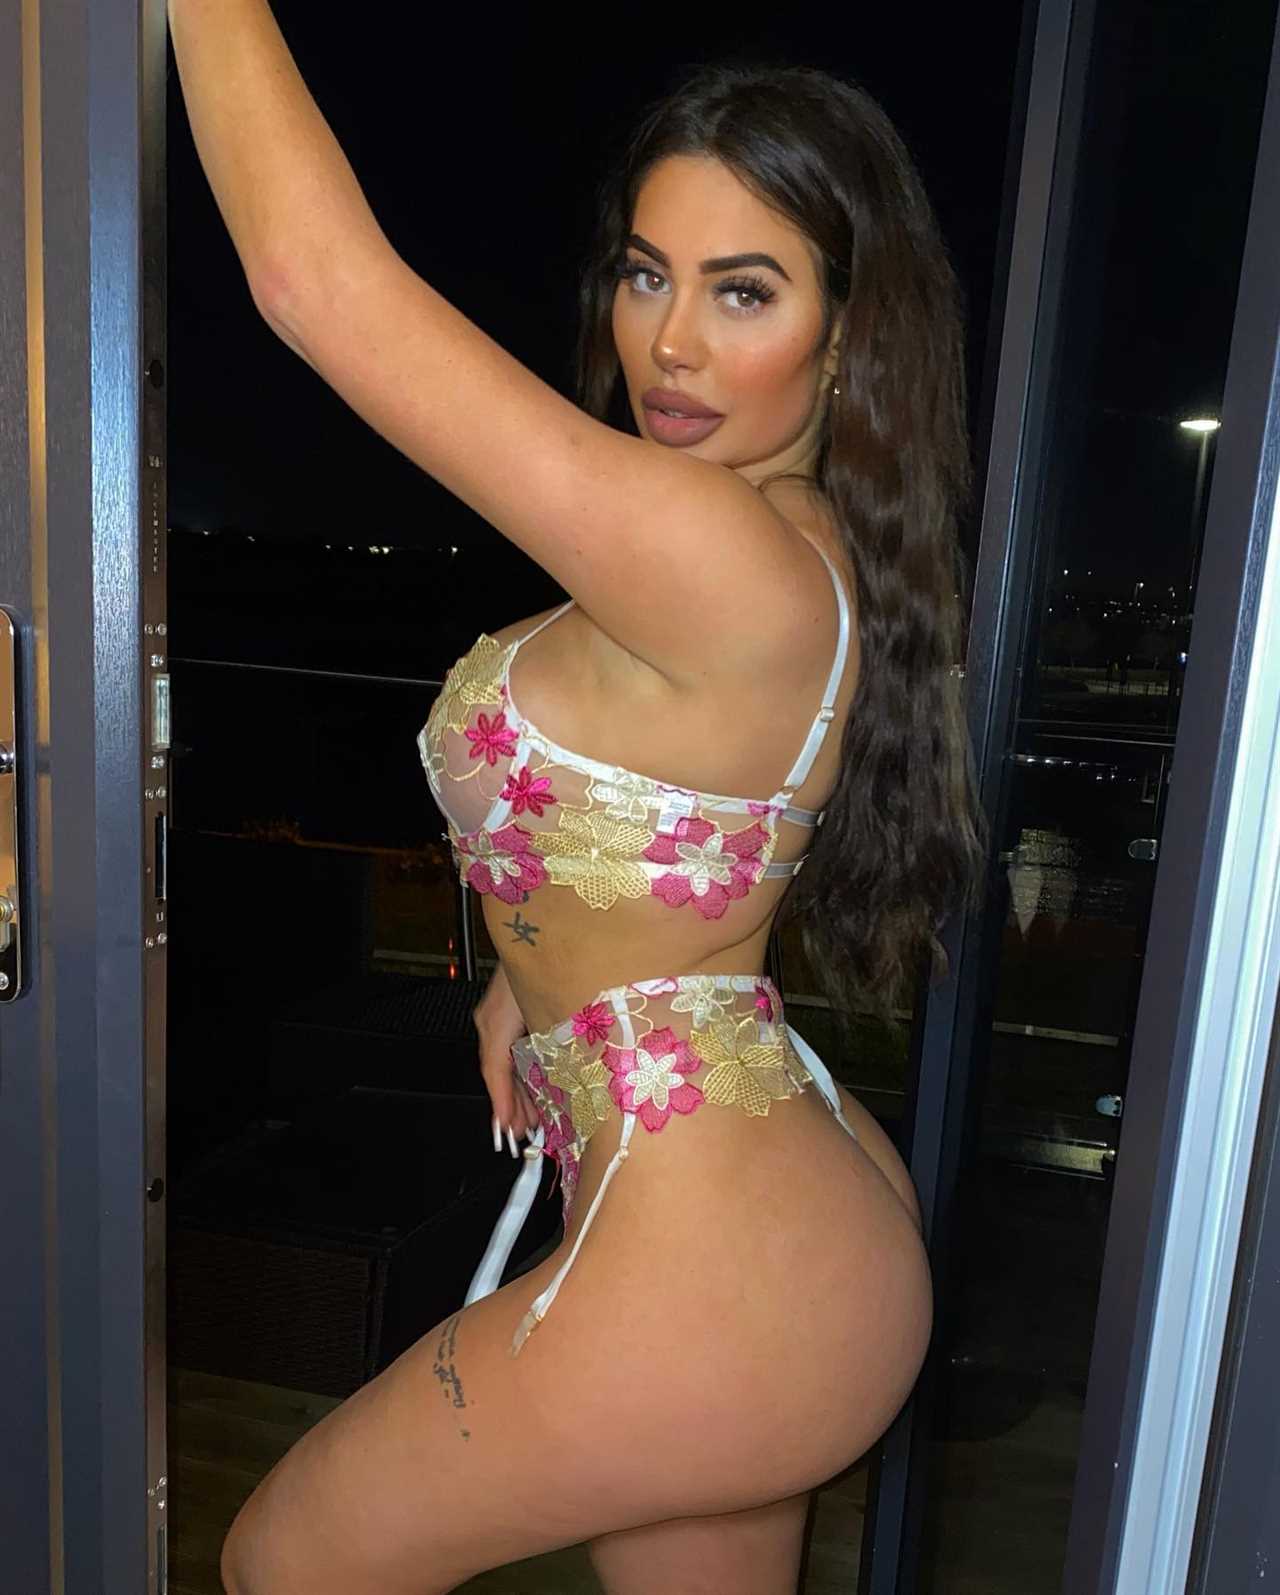 Chloe Ferry is giving mixed messages out about body confidence